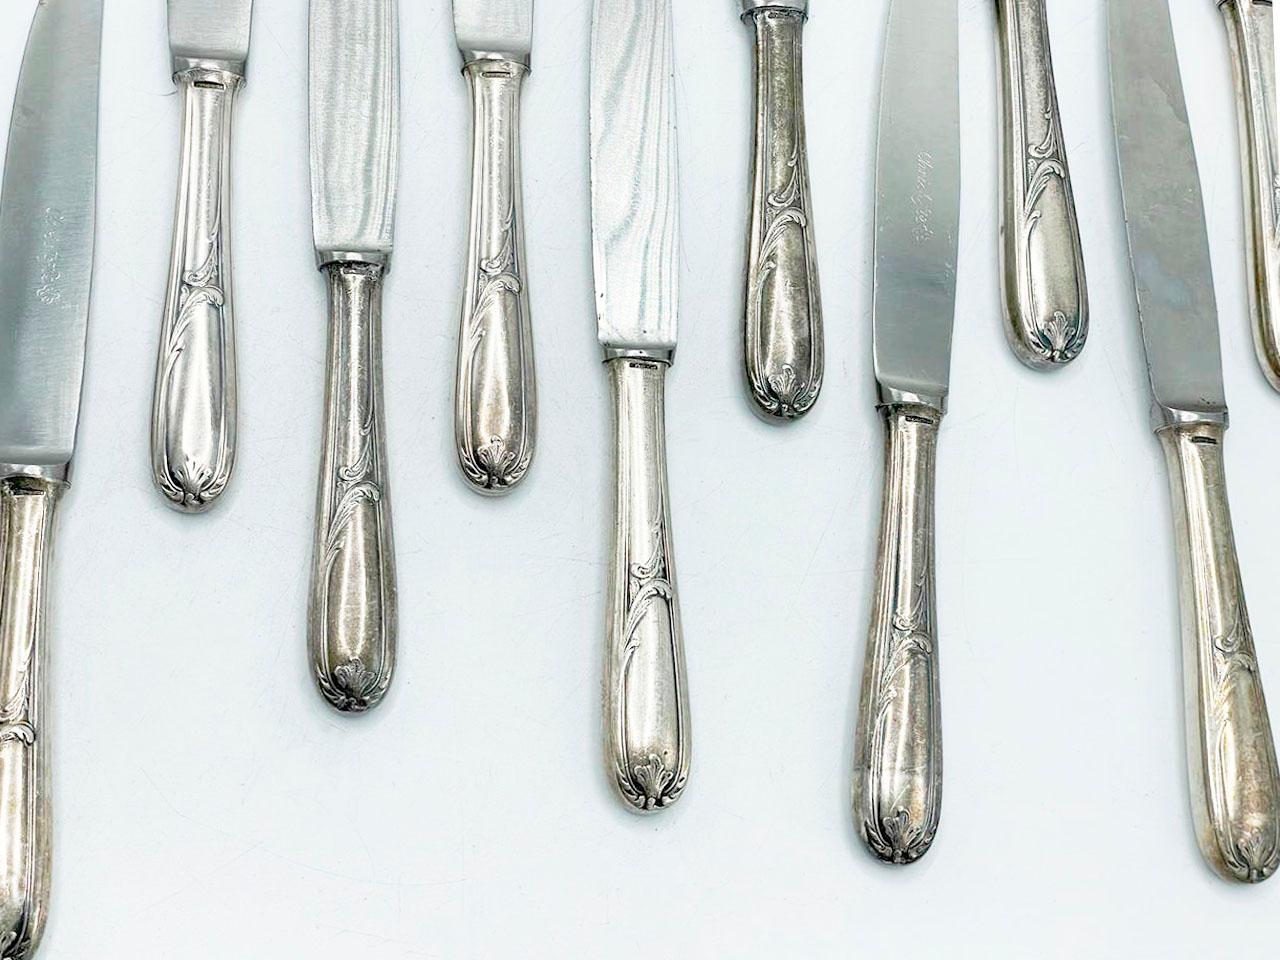 Christofle Made in Argentina, Flatware art nouveau in Silverplated For Sale 5